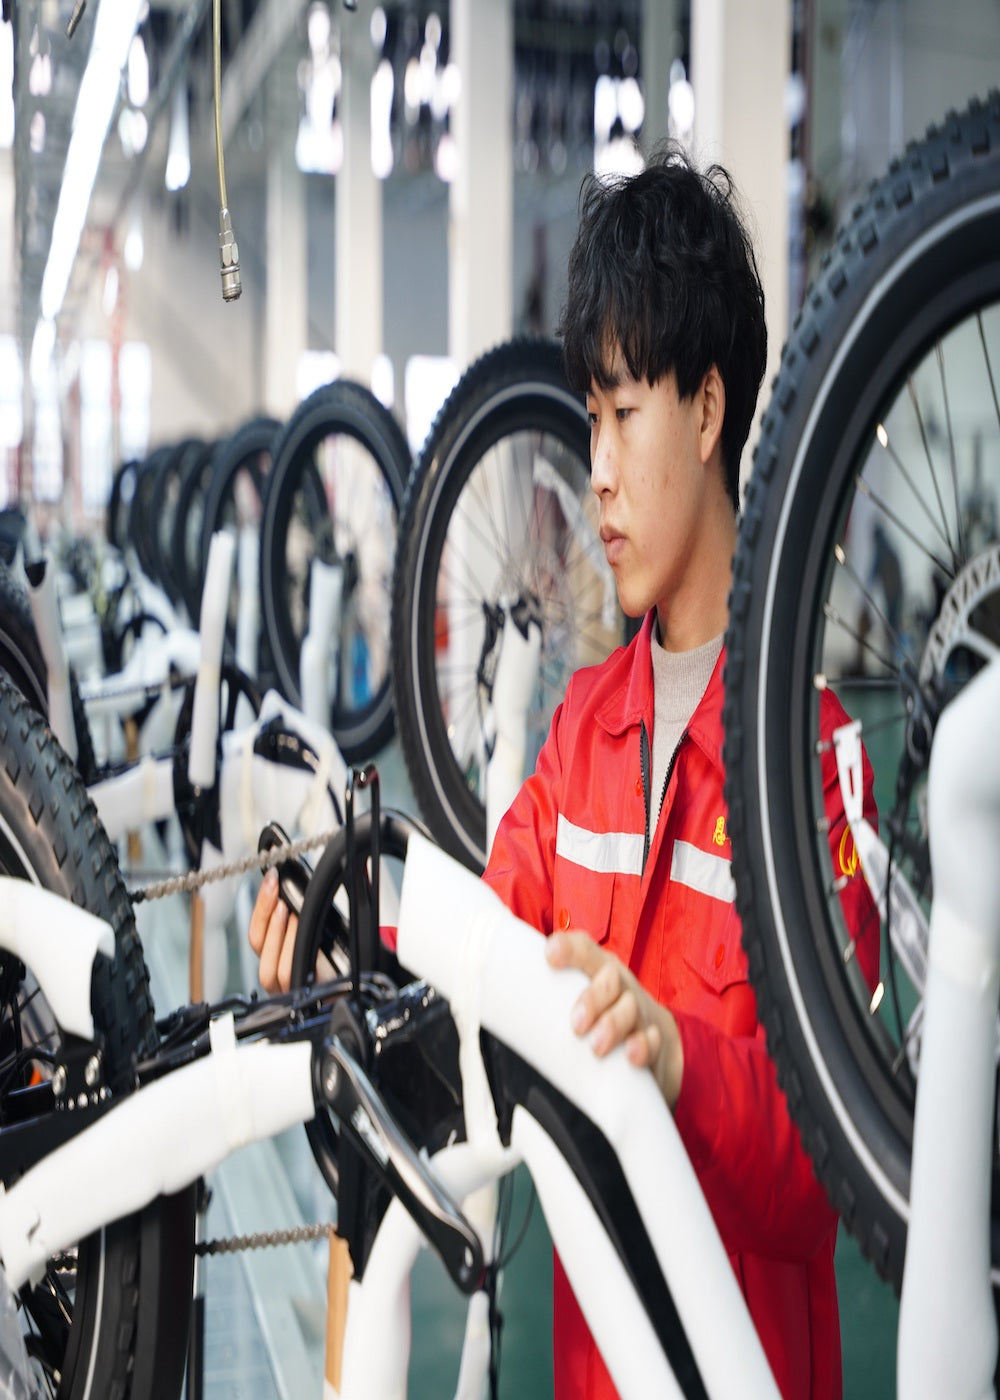 Ebike assembly line workers.